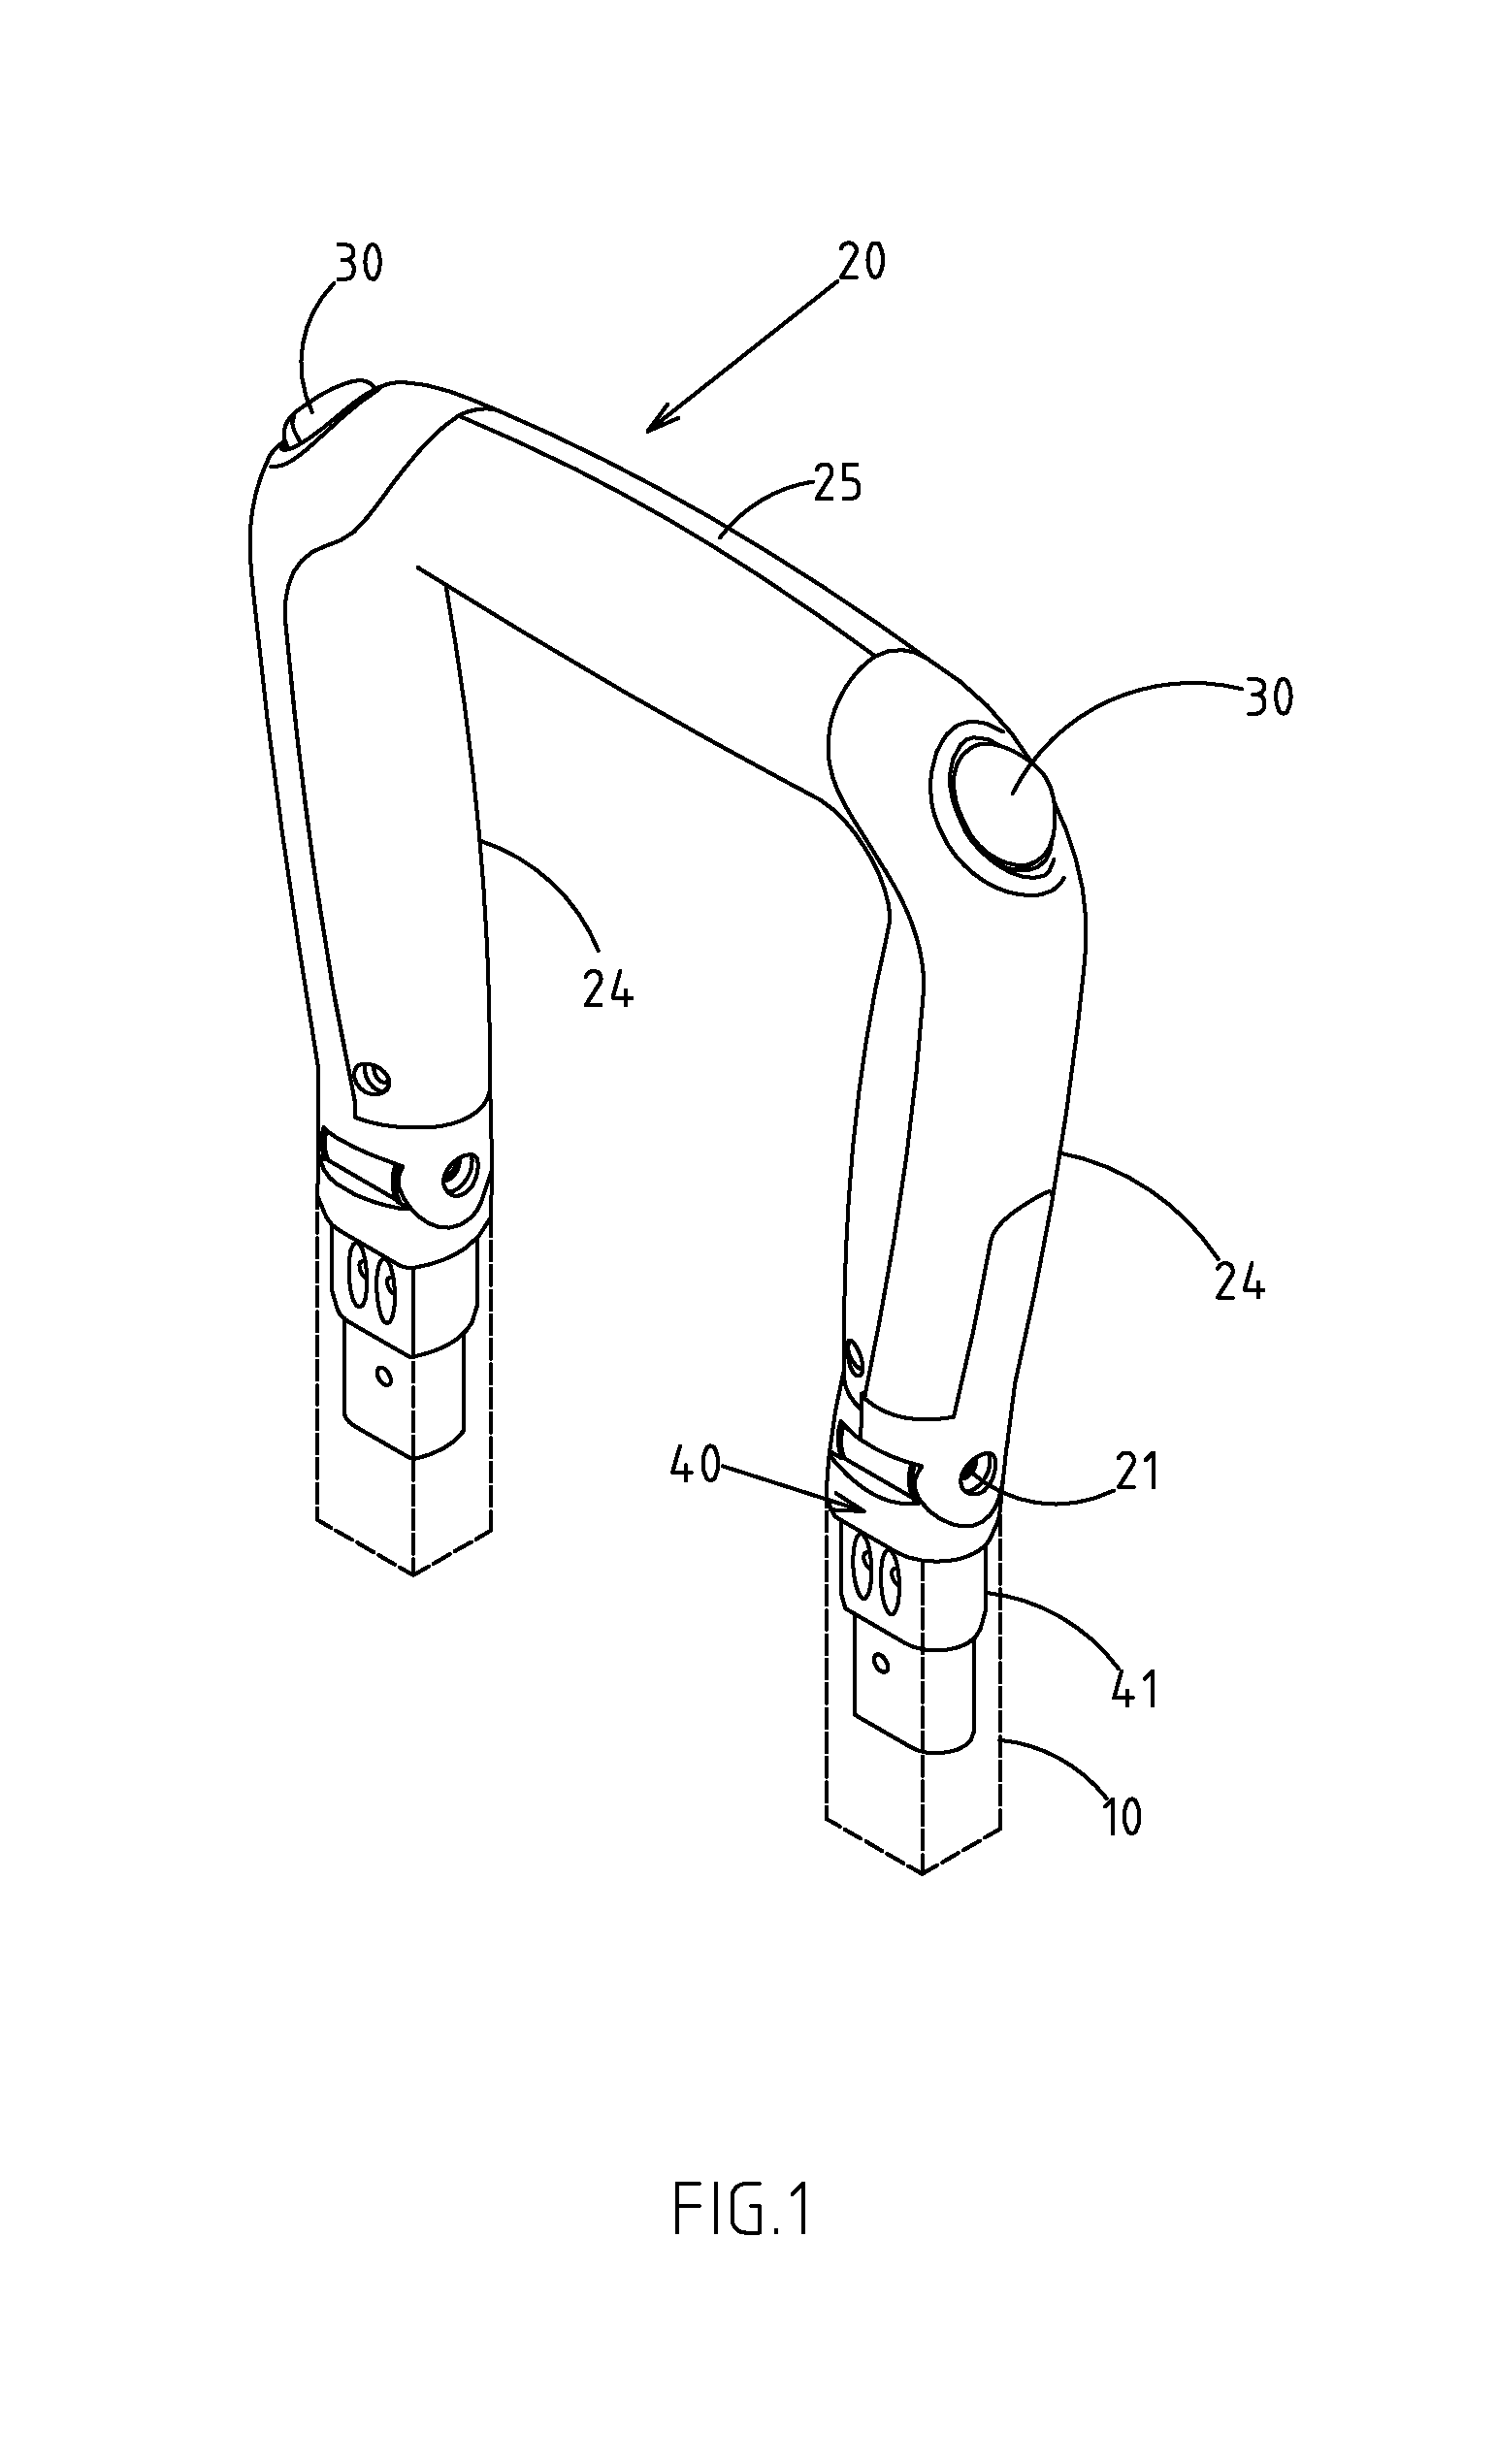 Pull handle provided with a grip handle with an adjustable angle